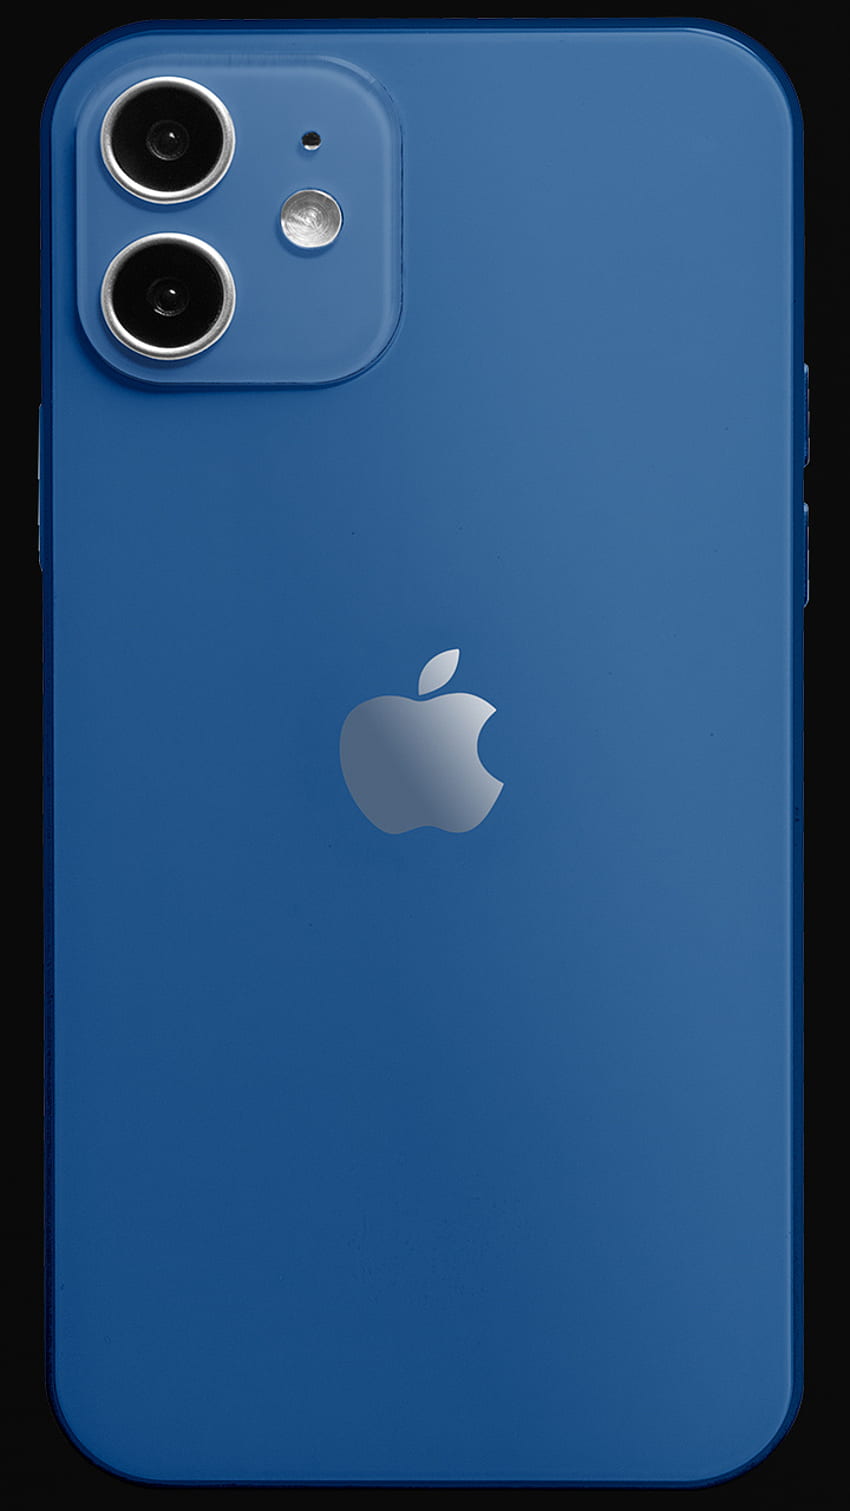 iPhone 12 Blue, mobile device, apple, electric blue, mobile HD phone wallpaper